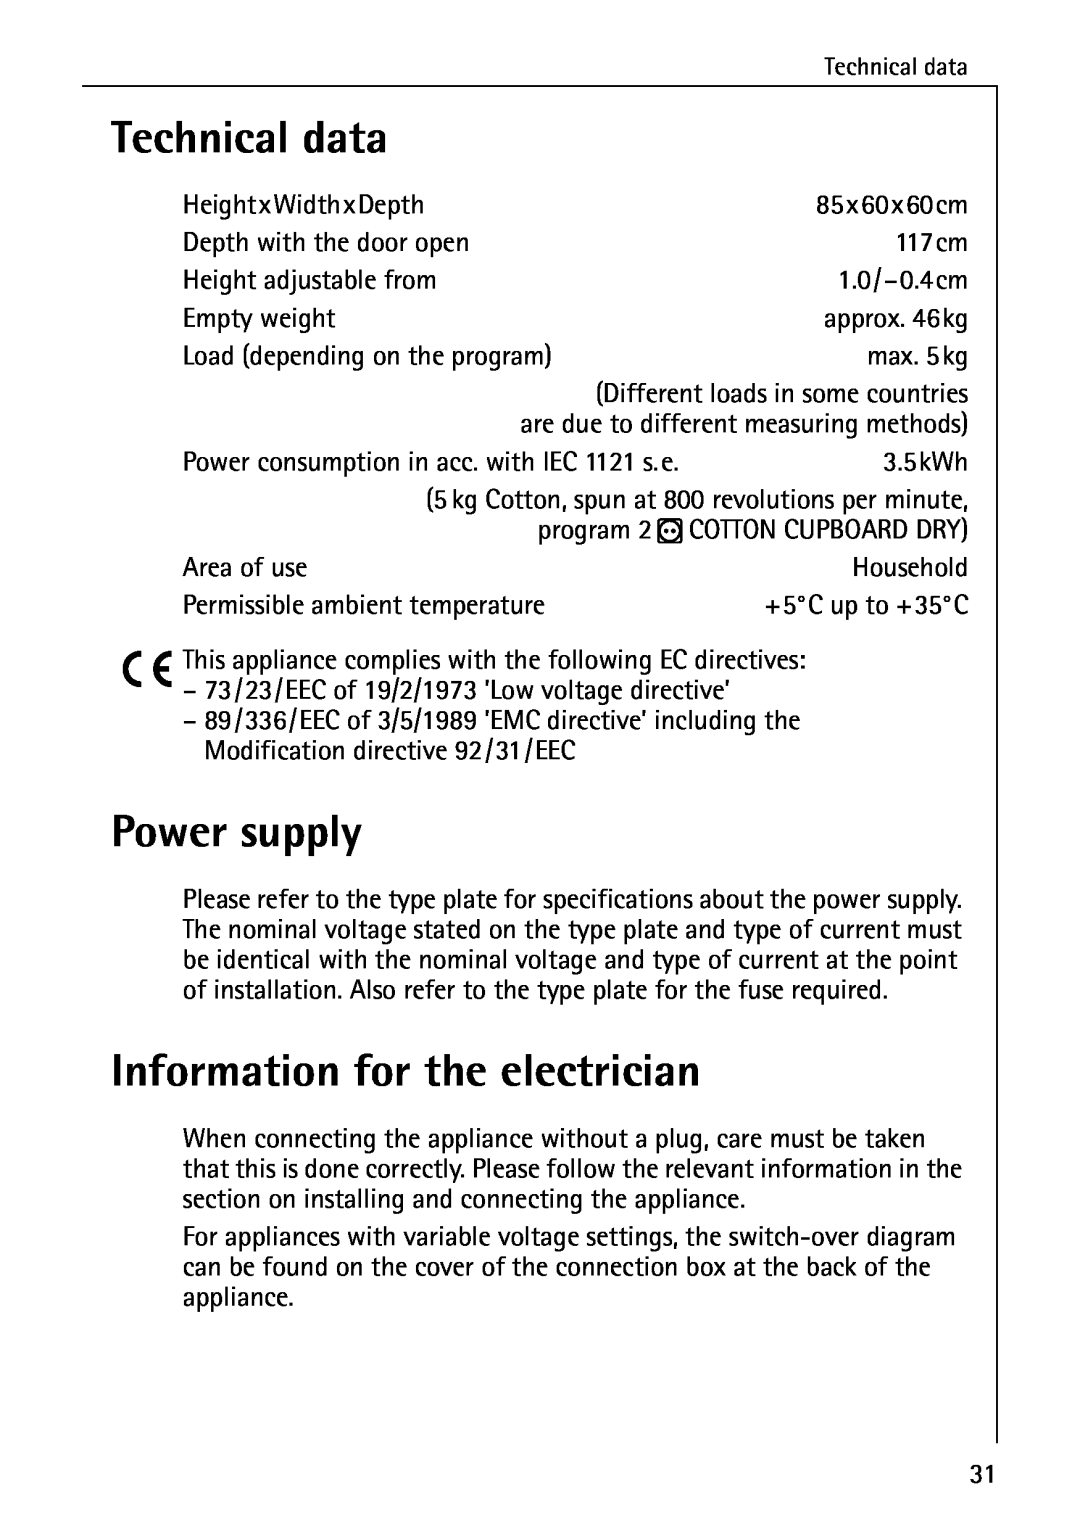 AEG 56609 operating instructions Technical data, Power supply, Information for the electrician 